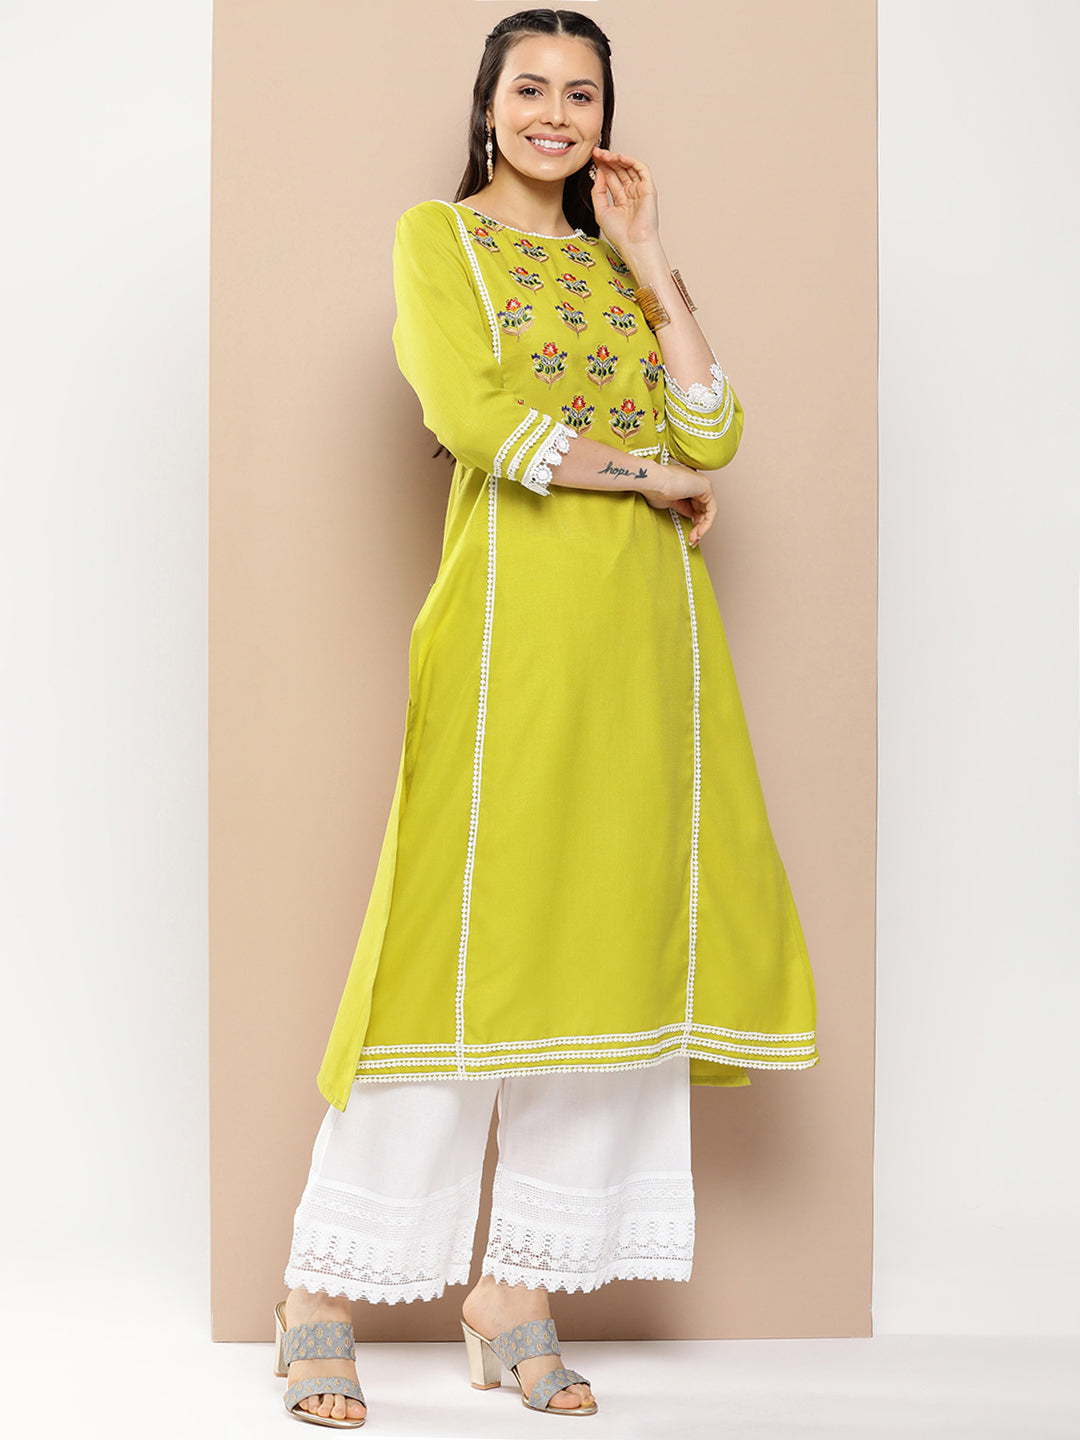 Women's Green And Red Yoke Design Kurta With Lace Details & Off White Palazzos - Bhama Couture